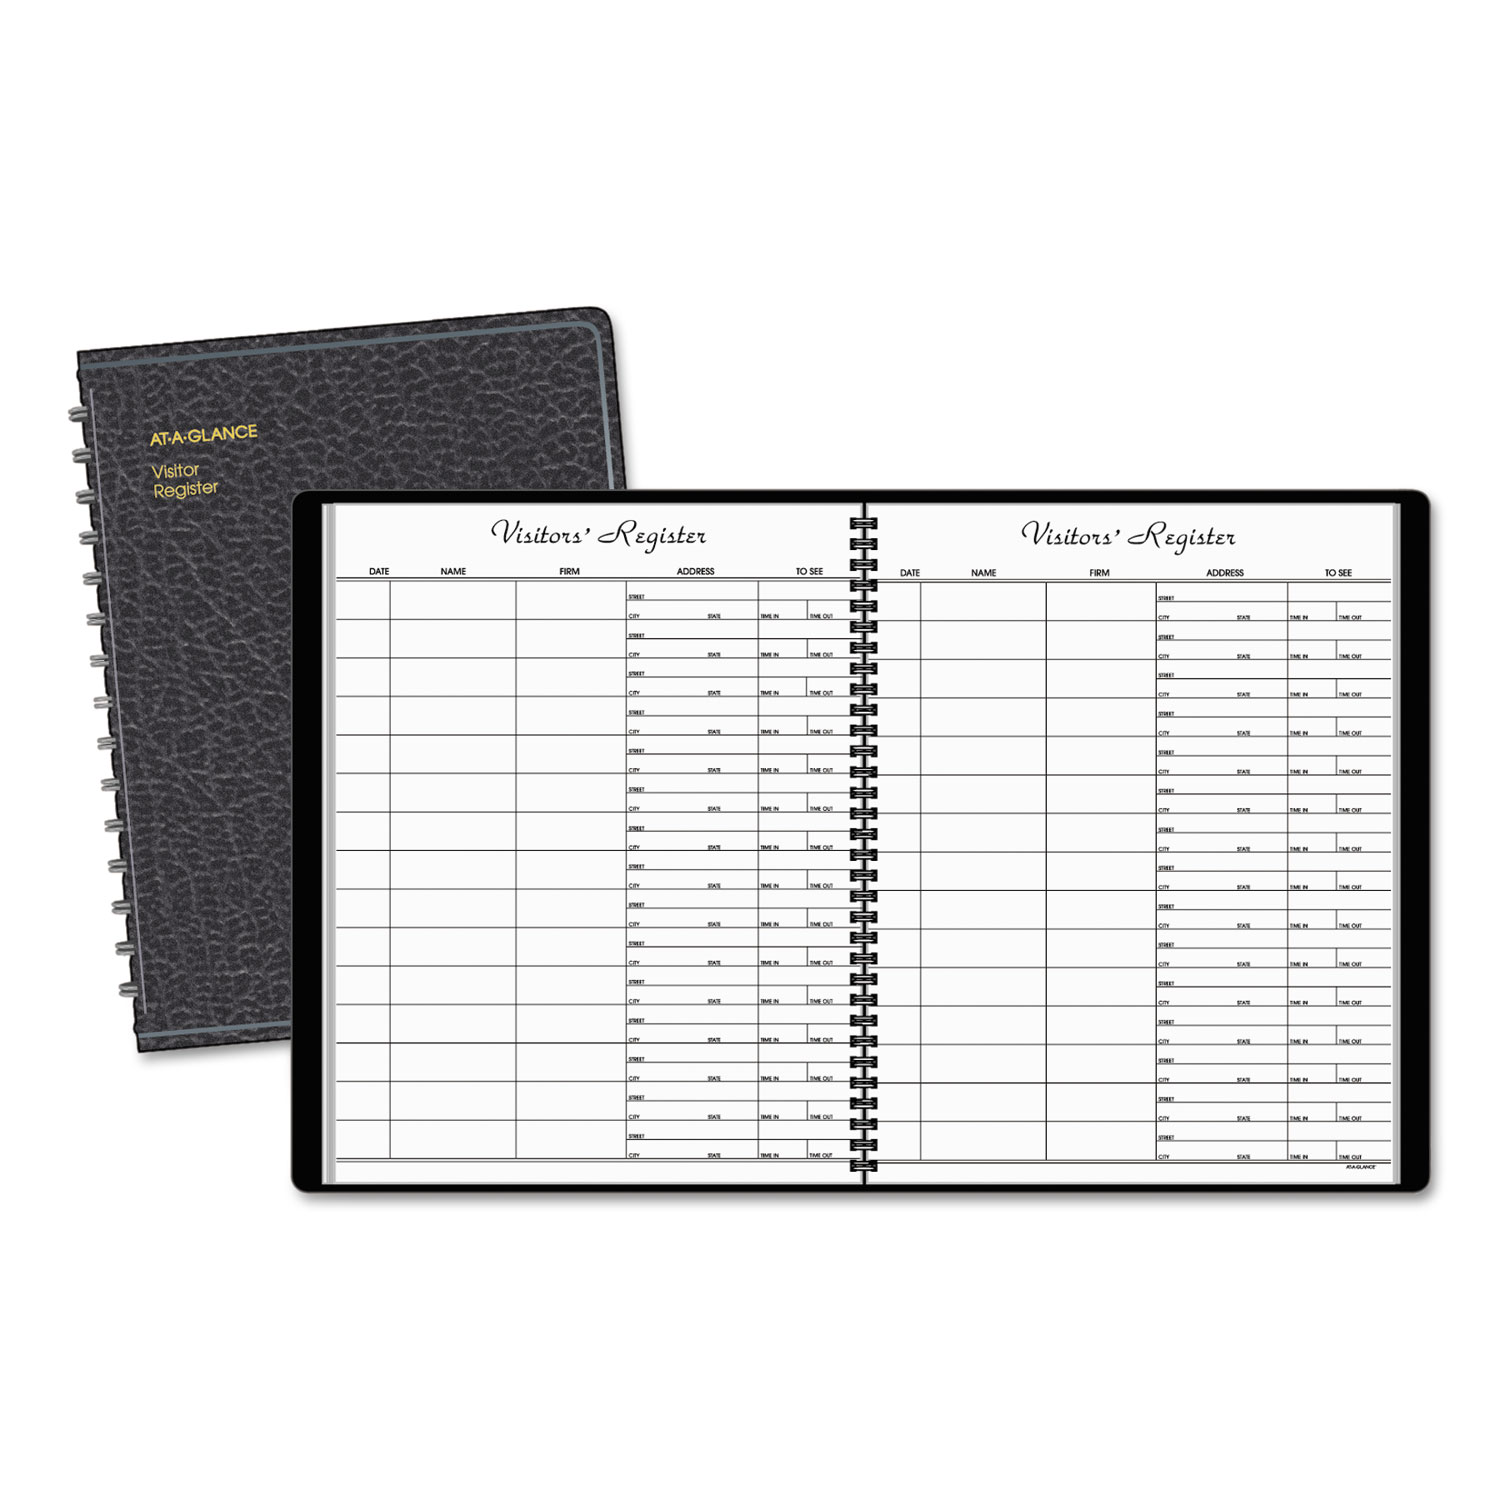  AT-A-GLANCE 80-580-05 Recycled Visitor Register Book, Black, 8.38 x 10.88 (AAG8058005) 